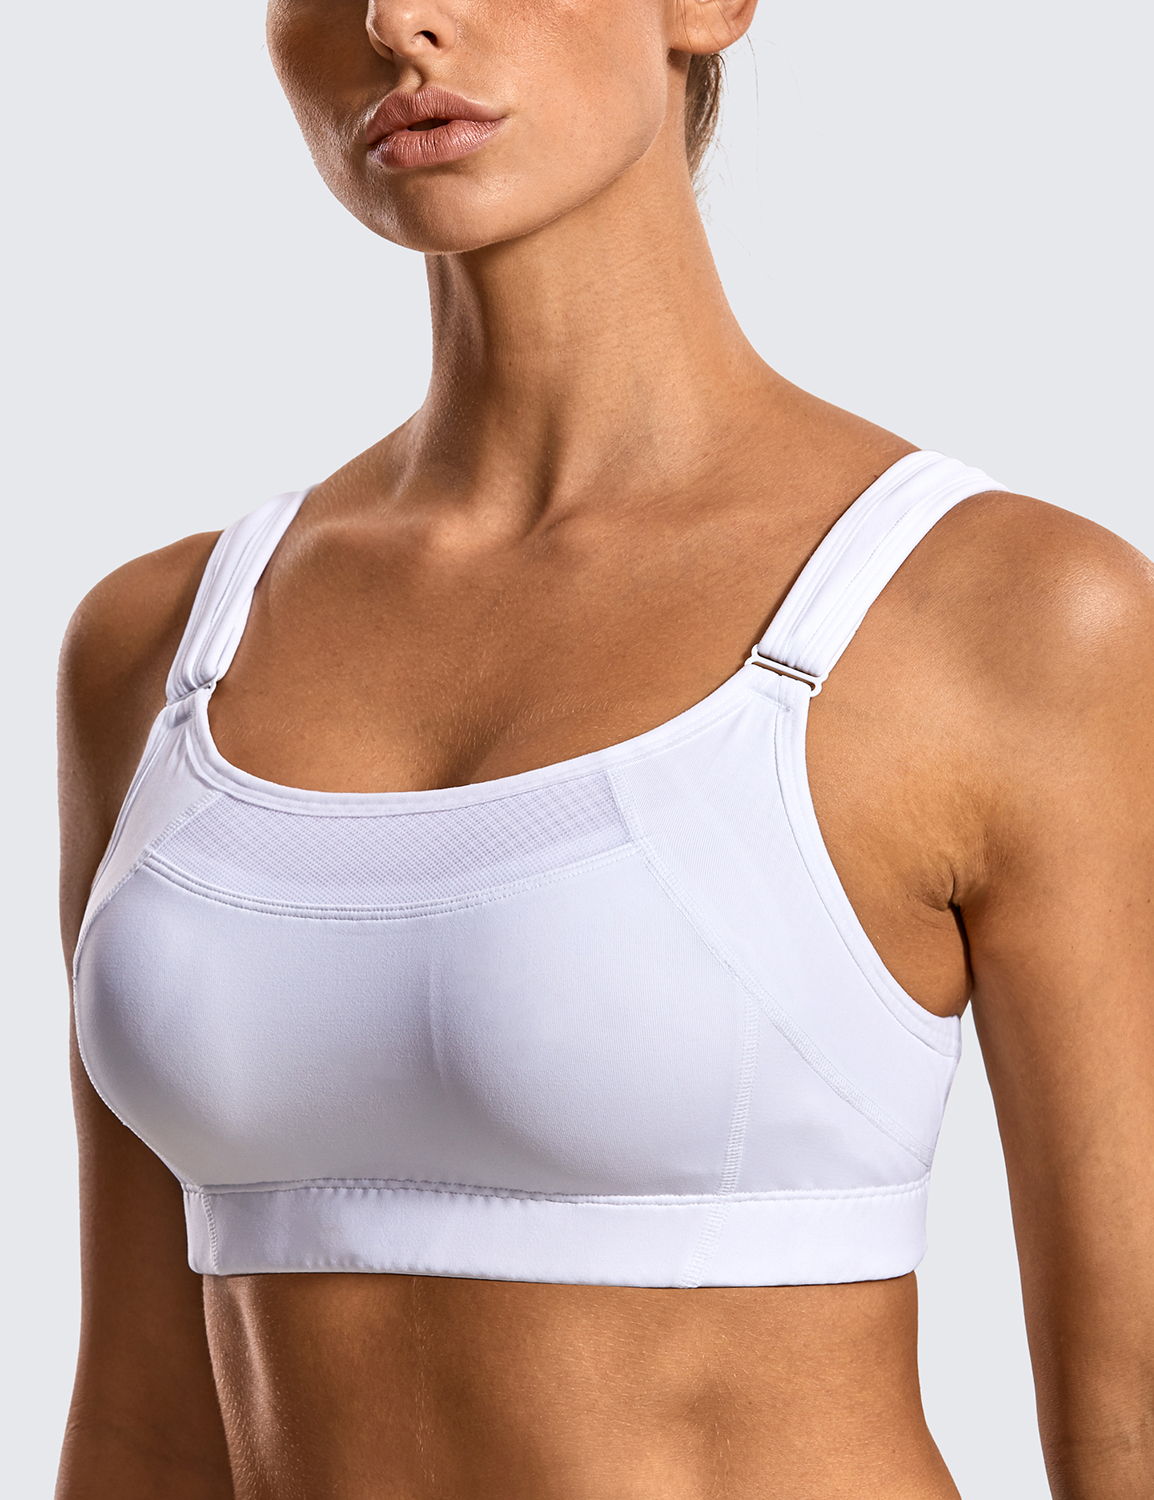 Womens Sports Bra Bounce Control Wire Free High Impact Max Support Ebay 6287